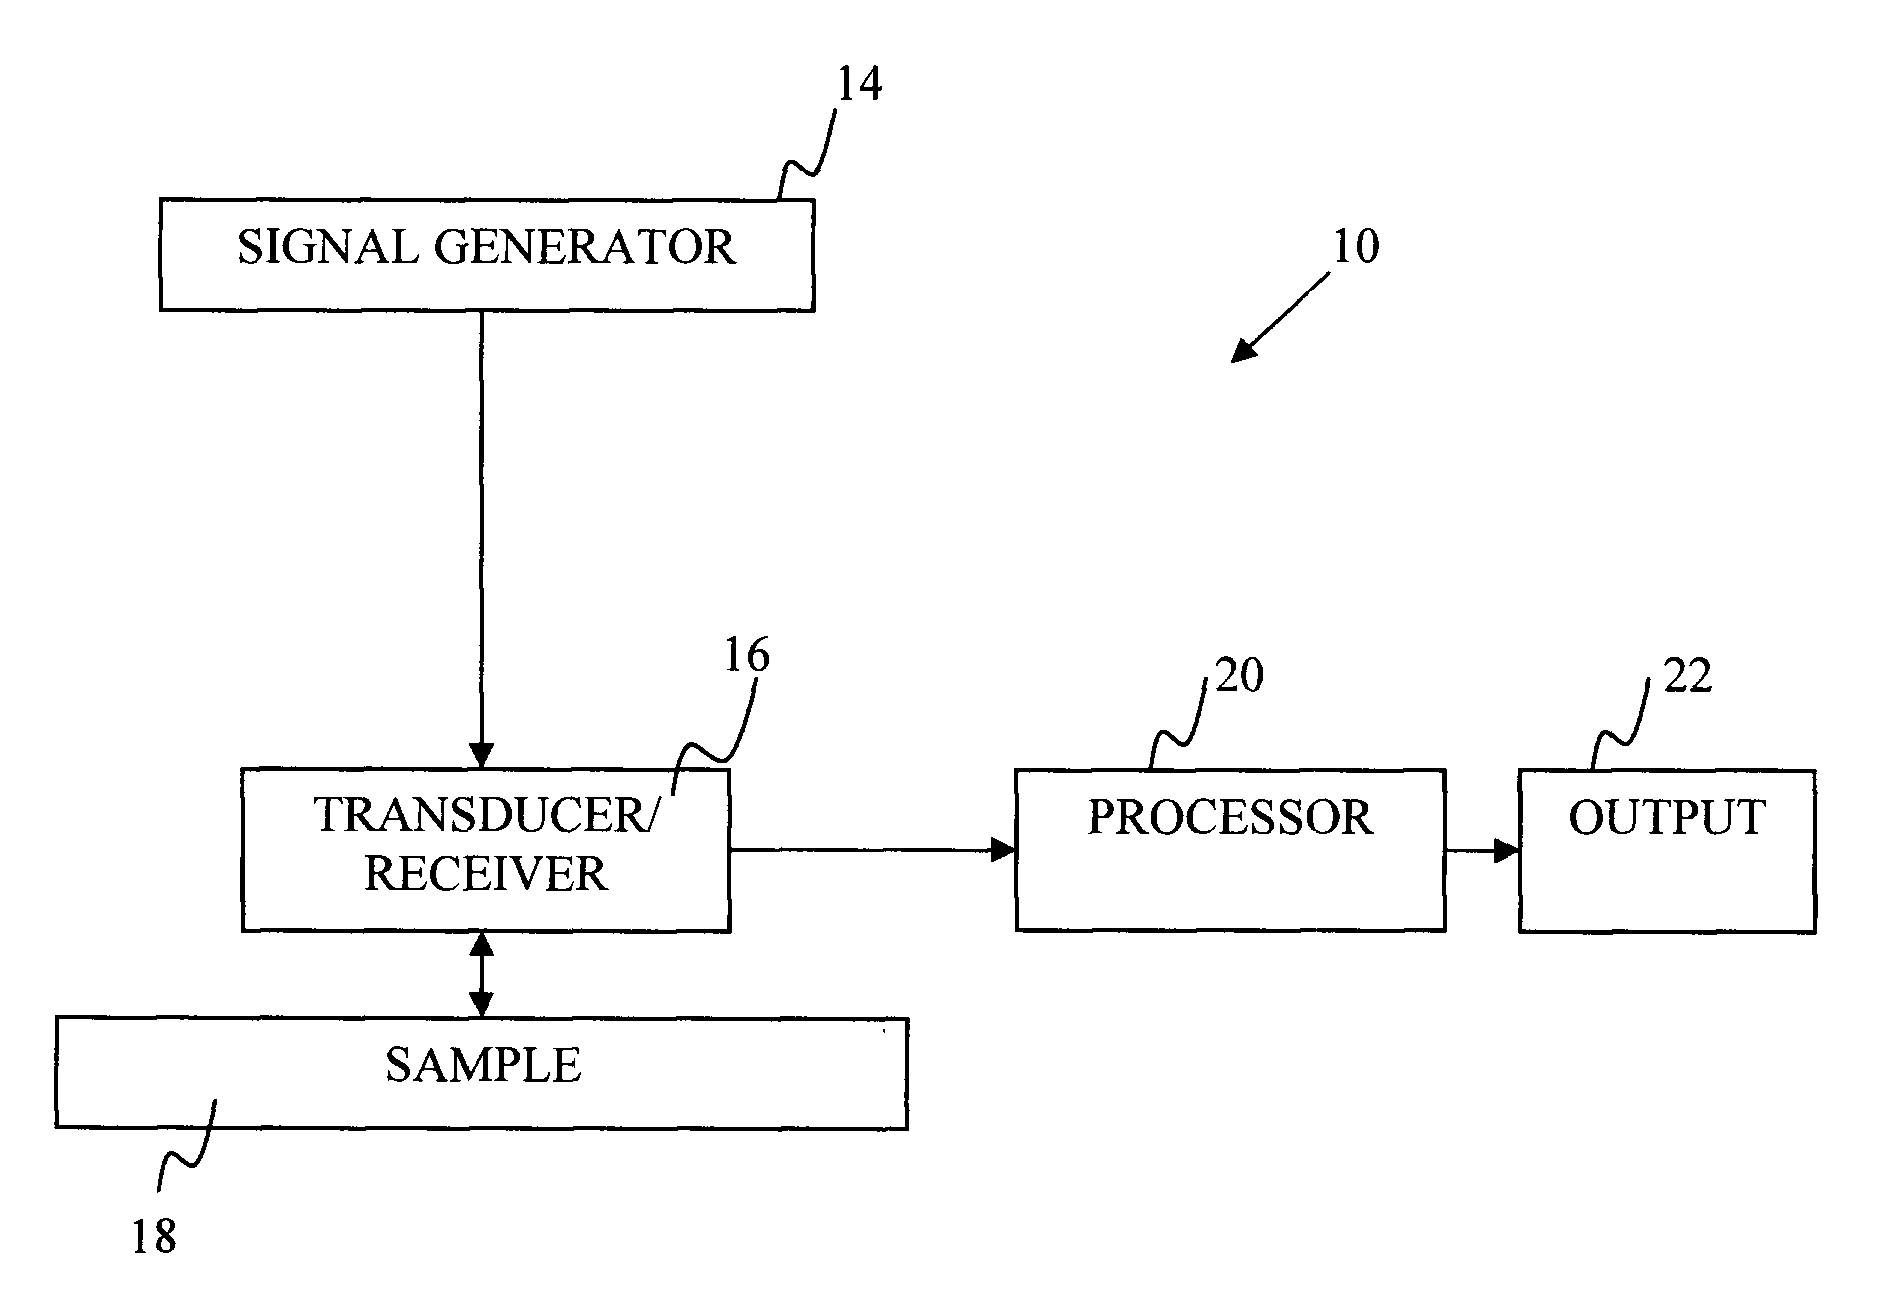 Method and system of ultrasound scatterer characterization